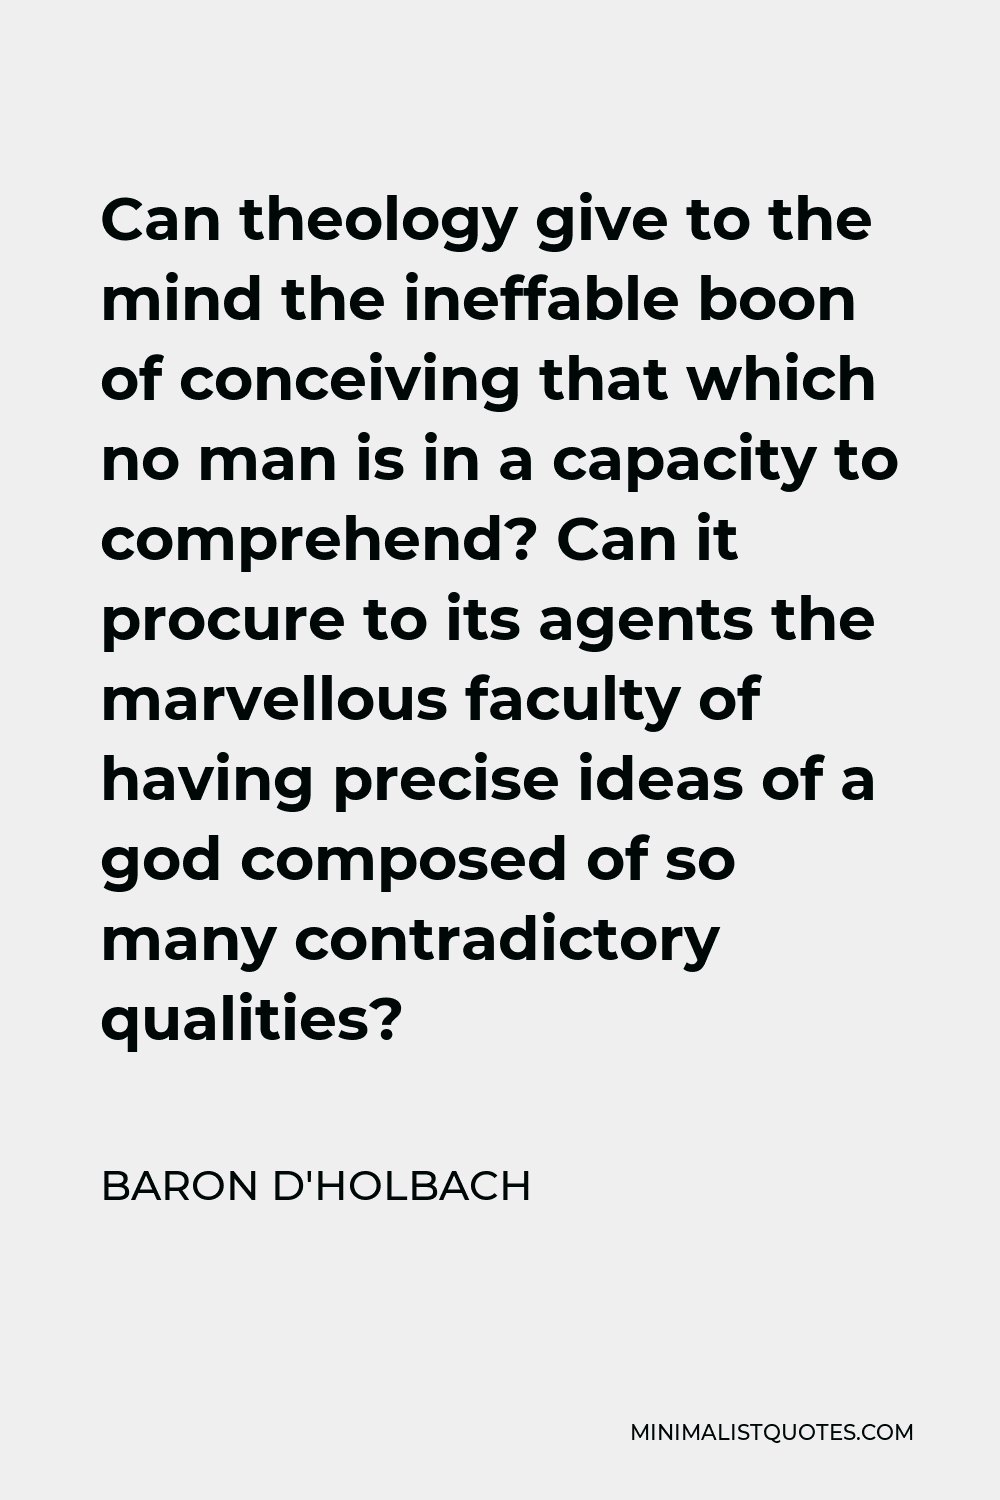 Baron d'Holbach Quote - Can theology give to the mind the ineffable boon of conceiving that which no man is in a capacity to comprehend? Can it procure to its agents the marvellous faculty of having precise ideas of a god composed of so many contradictory qualities?